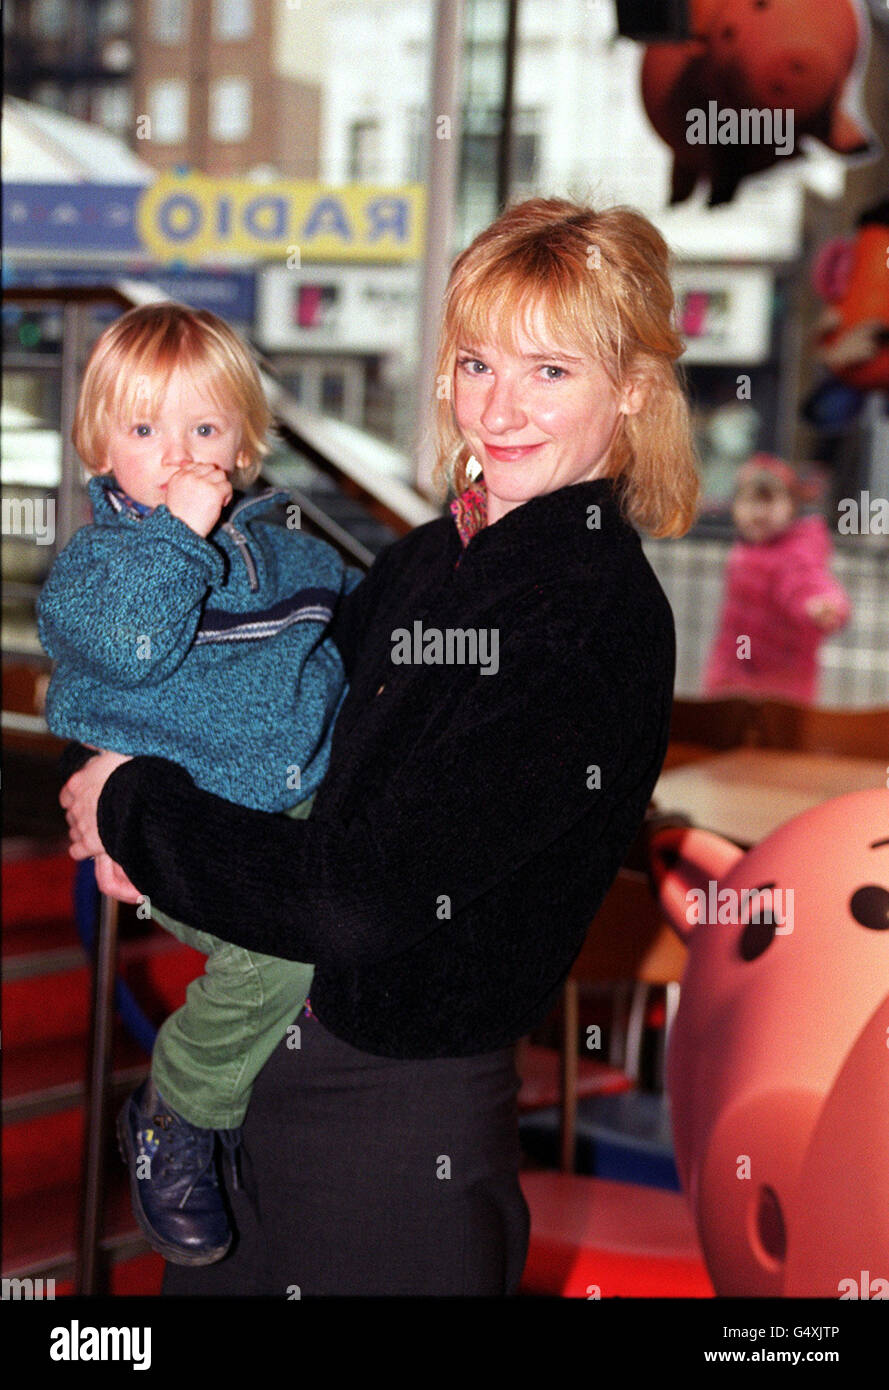 Actress Jane Horrocks with her two-year-old son Dylan, at the British film premiere of Toy Story 2 at the Warner Village Cinema in Finchley, London. Stock Photo